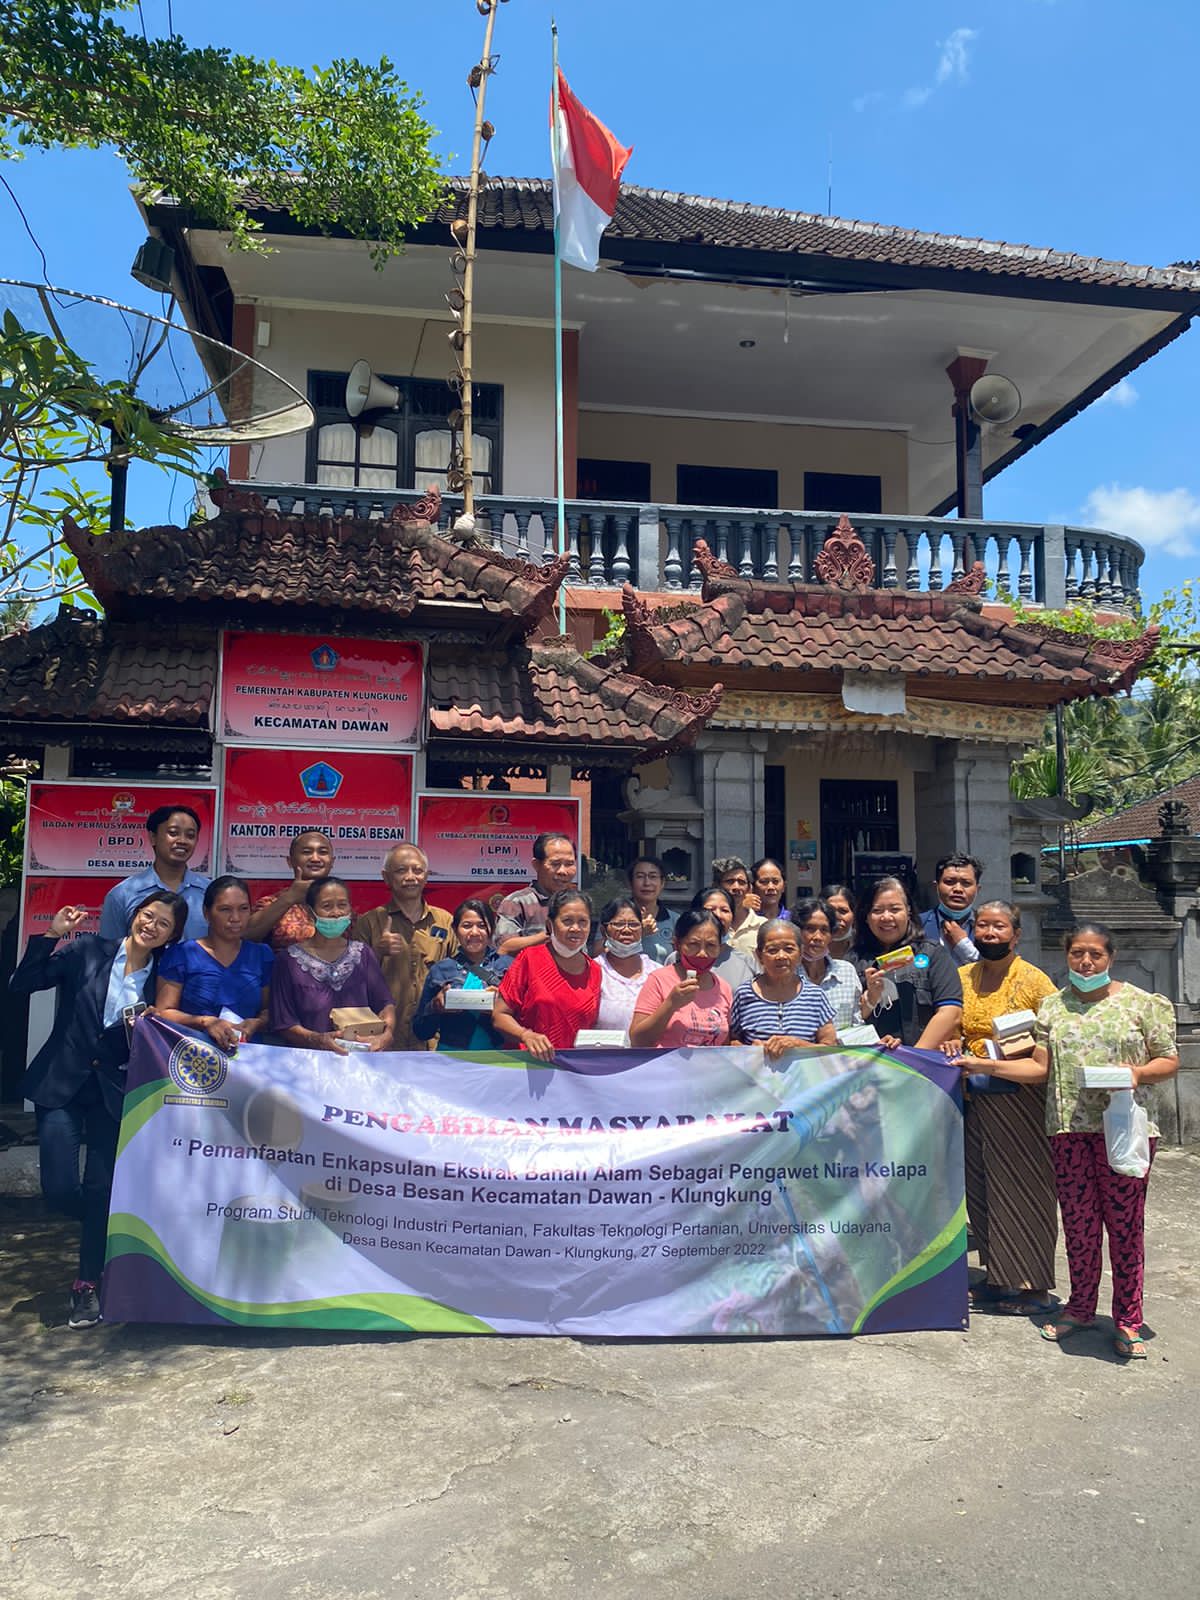 Implementing Research Results in the Community, the entire Lecturer Team of the Agroindustrial Technology Study Program Devoted to the Utilization of Encapsulations as a Preservative of Coconut Sap in Besan Village, Klungkung